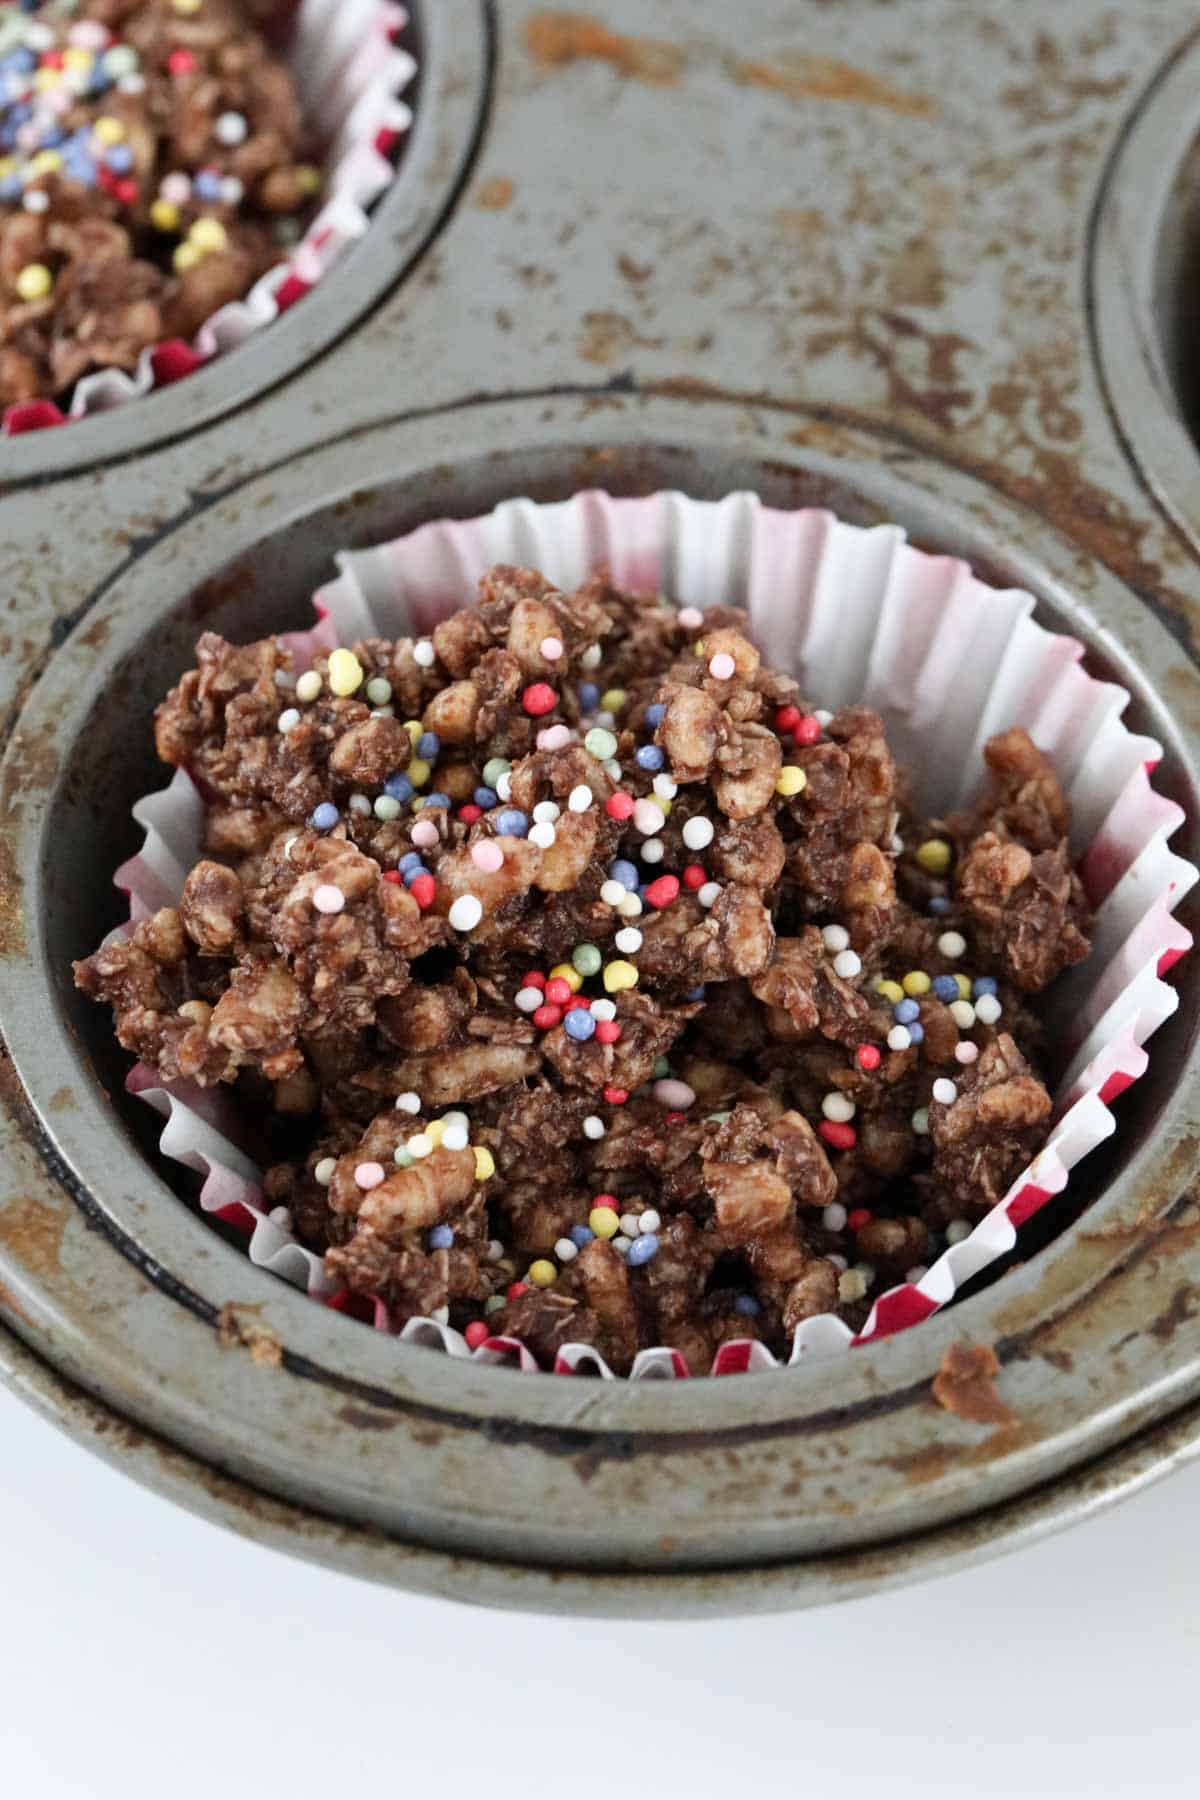 Sprinkles on top of chocolate crackles in a muffin tin.